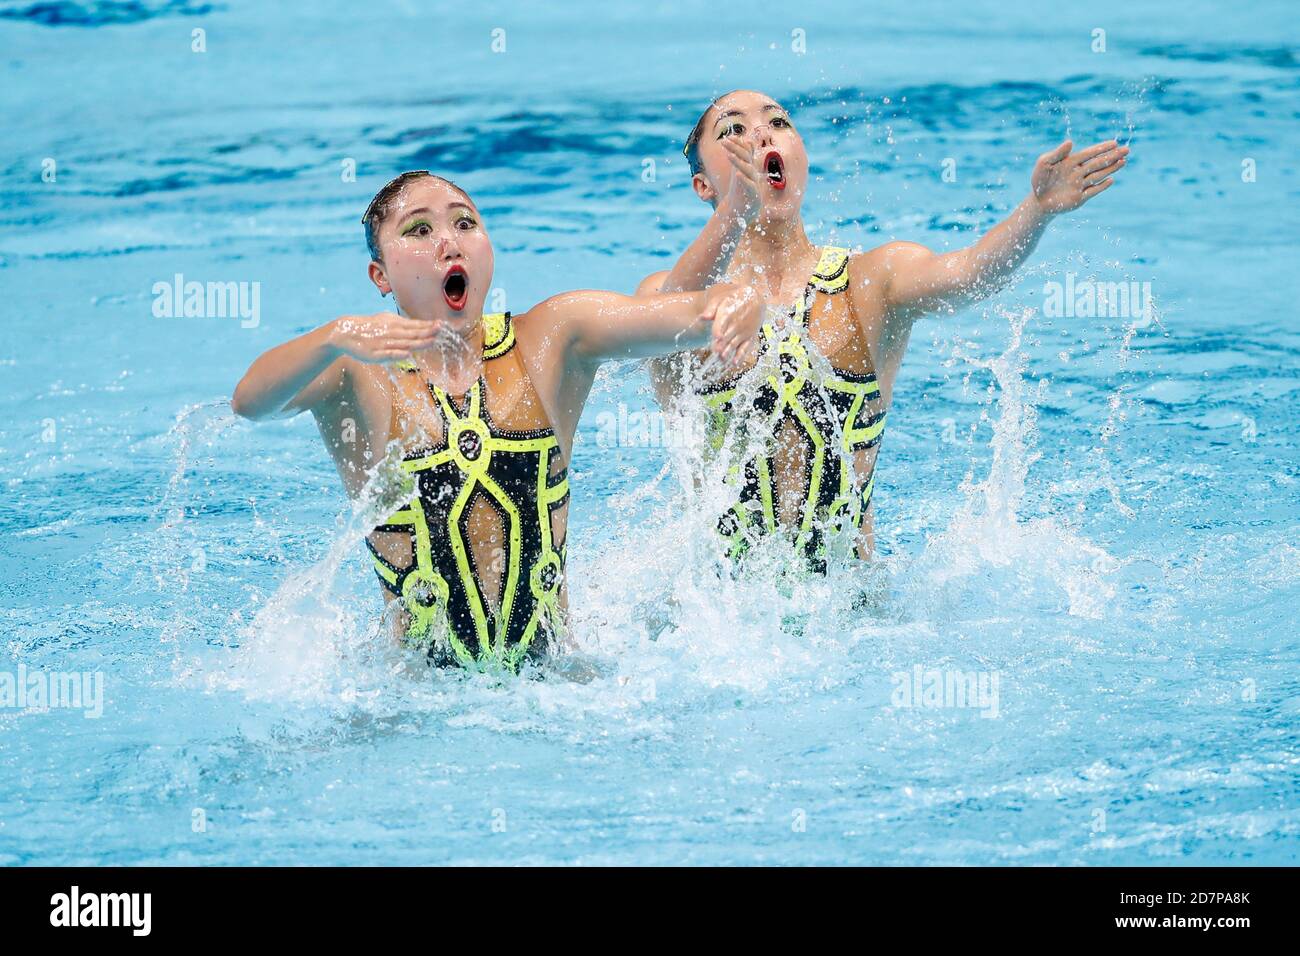 Tokyo, Japan. 24th Oct, 2020. Japanese artistic swimmers INUI YUKIKO and MEGUMI YOSHIDA perform during the grand opening ceremony for the Tokyo Aquatics Centre. The venue will host Tokyo 2020 Olympic and Paralympic Games' swimming, diving and artistic swimming competitions next summer. Credit: Rodrigo Reyes Marin/ZUMA Wire/Alamy Live News Stock Photo